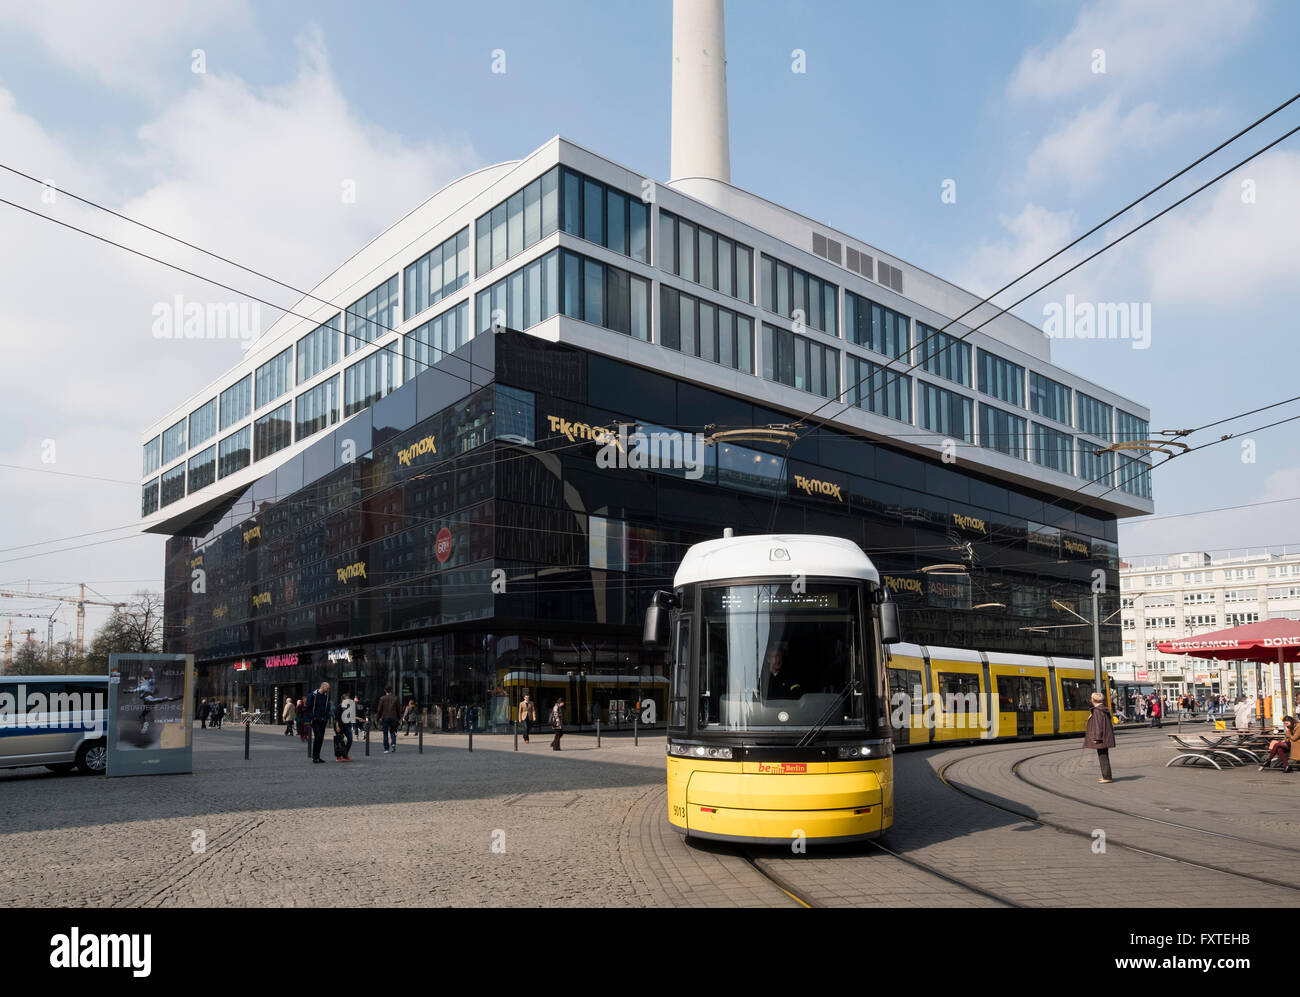 View of new TK Maxx shopping centre and tram in Alexanderplatz in Mitte Berlin Germany Stock Photo